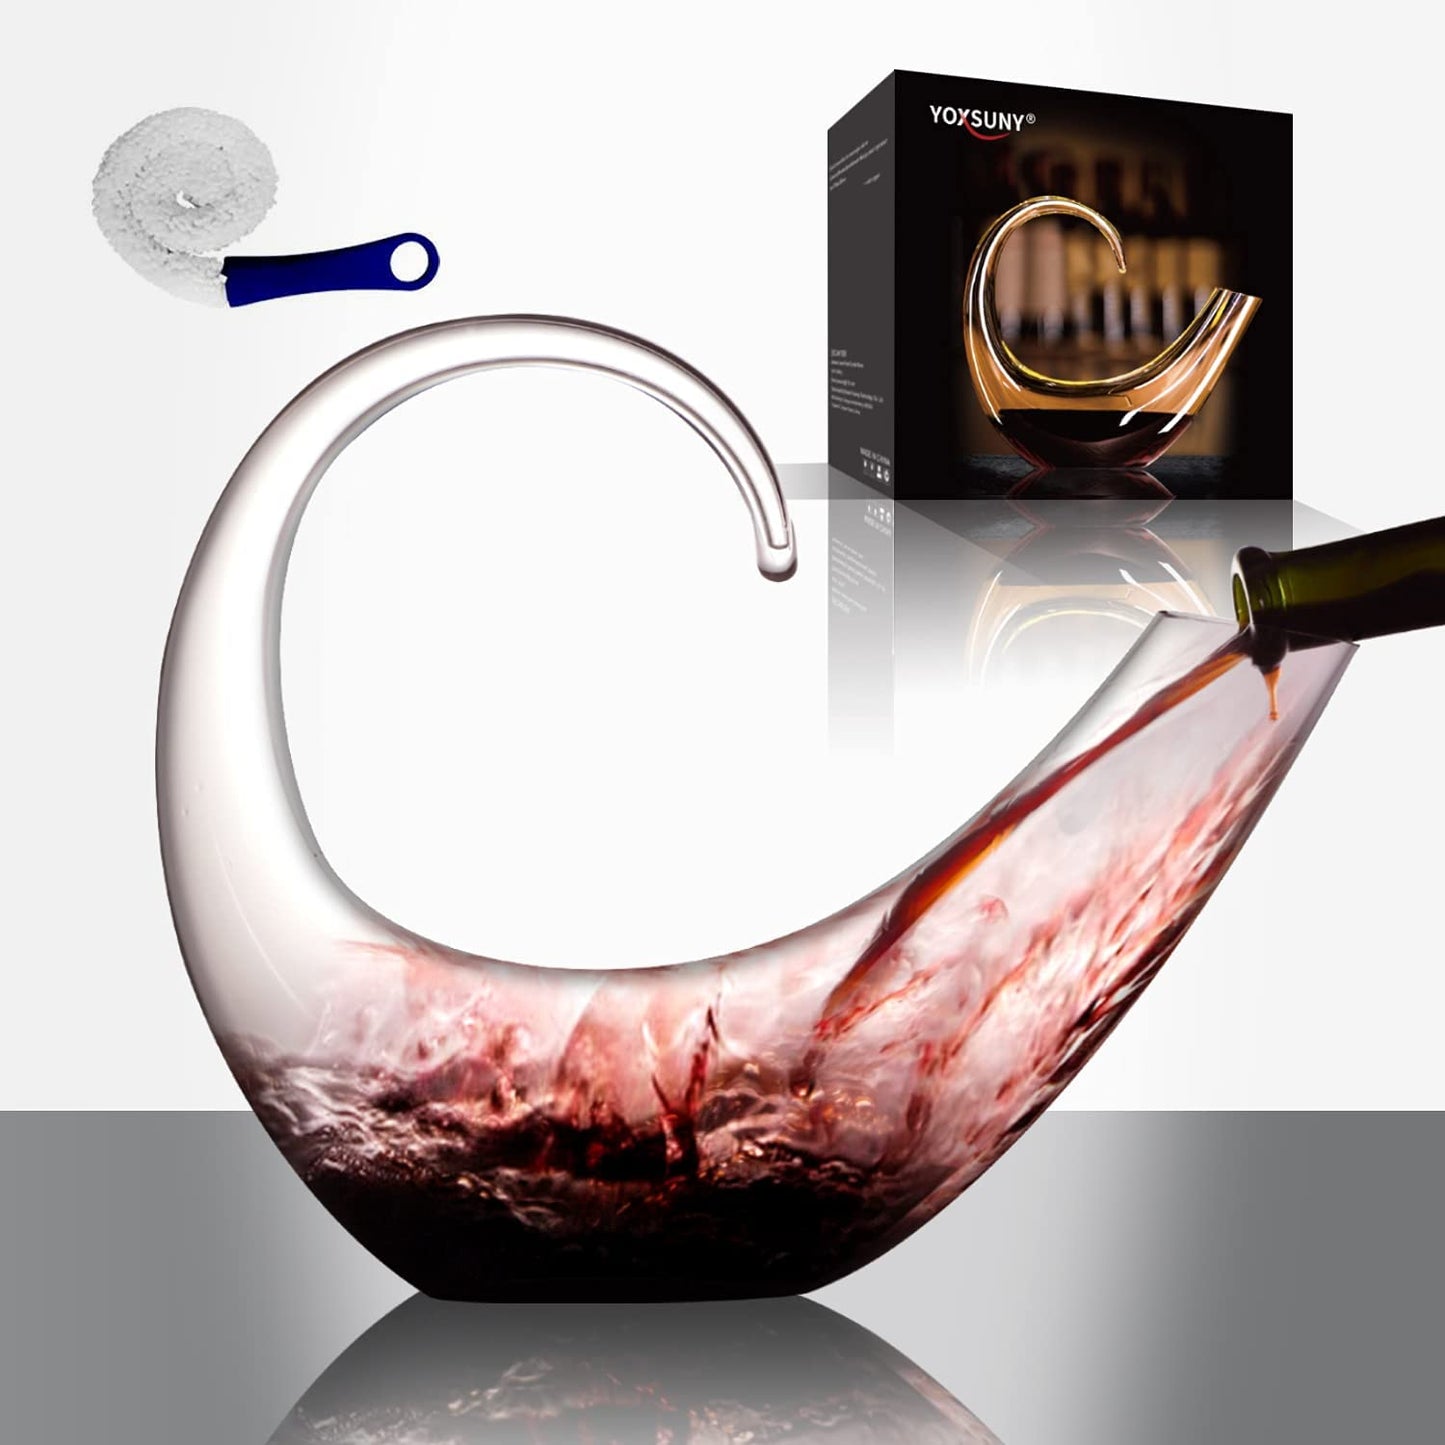 Wine Decanter Swan Looking Back Wine Carafes 100% Lead-Free Crystal Glass Red Wine Decanter Juice Container Wine Decanters and Carafes Nice Gift for Wine Lover(1.5L)